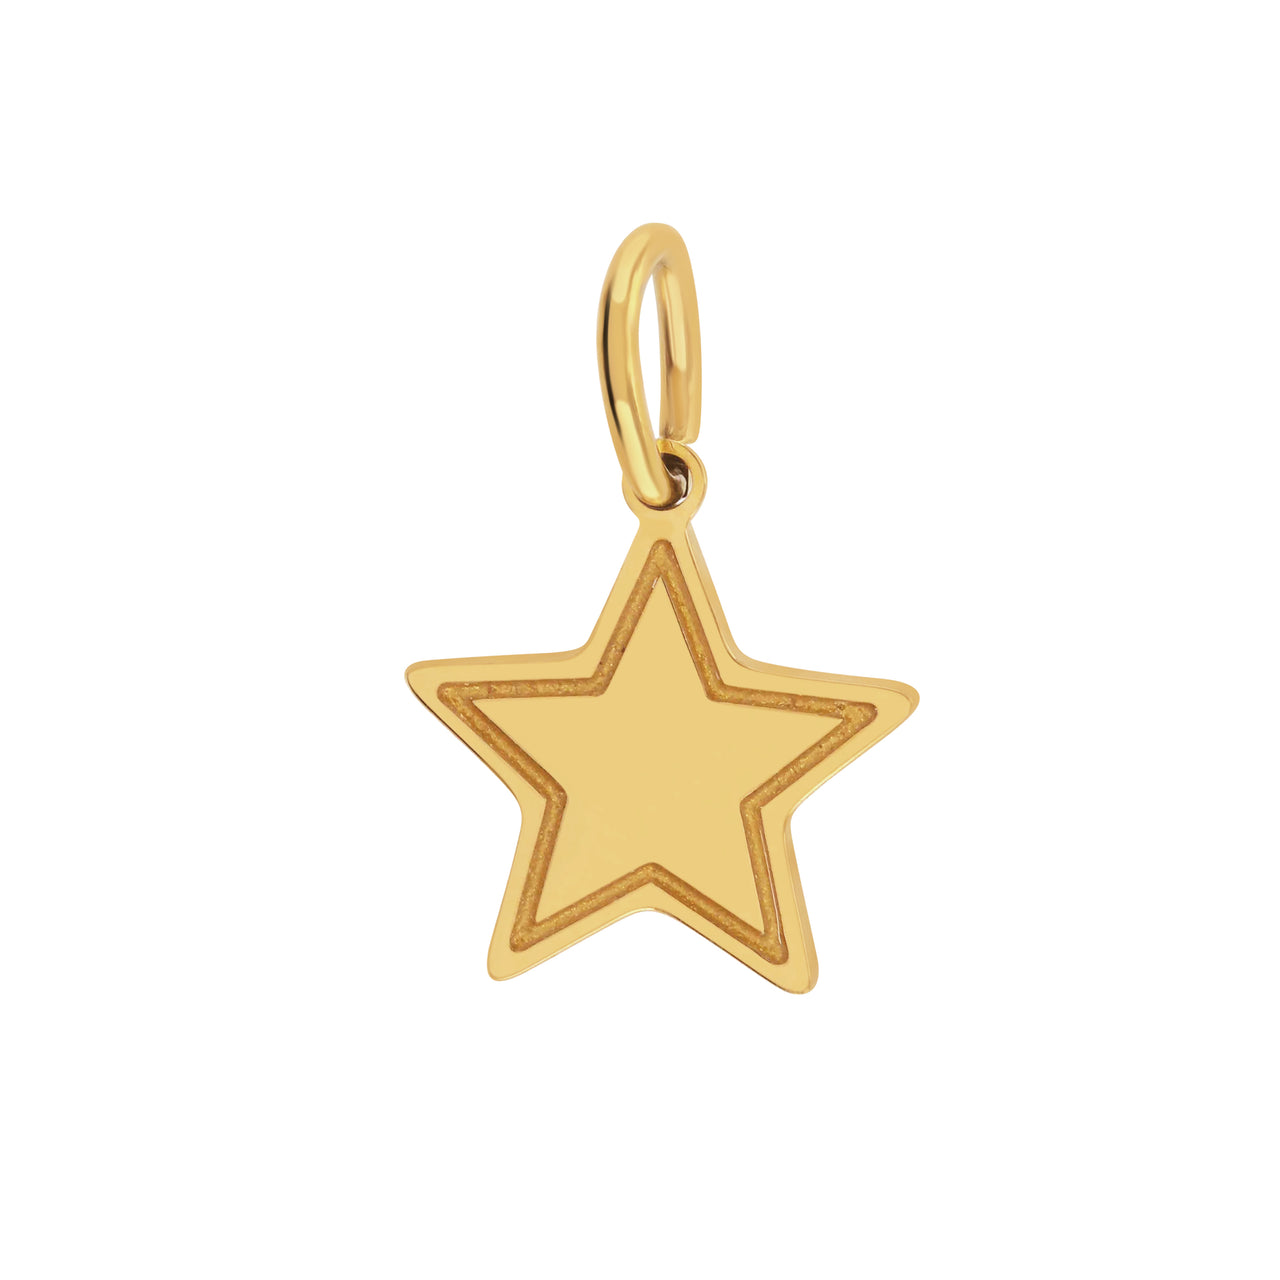 Gold Star charm with sparkly enamel